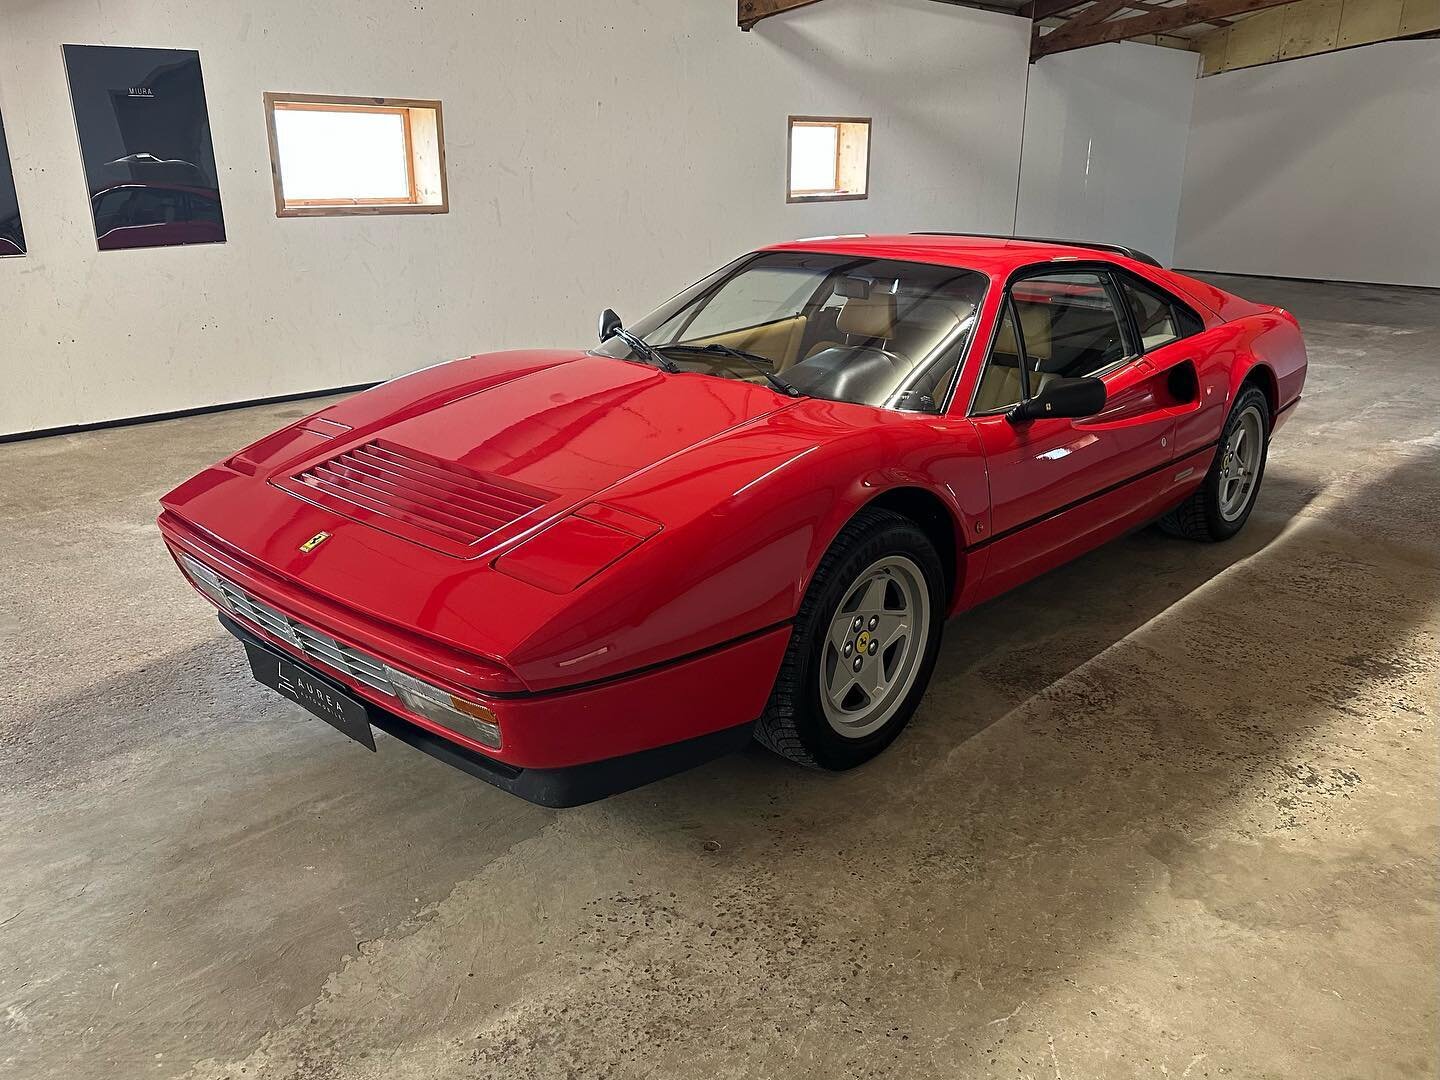 1987 Ferrari 328 GTB
First delivered in Geneva, we bought it from the second owner in Moudon, north of Lausanne, 27k km on the clock!👌

#ferrari #ferrari328 #ferrari328gtb #ferrarichat #pininfarina #drivevintage #carculture #petrolhead #savethemanua